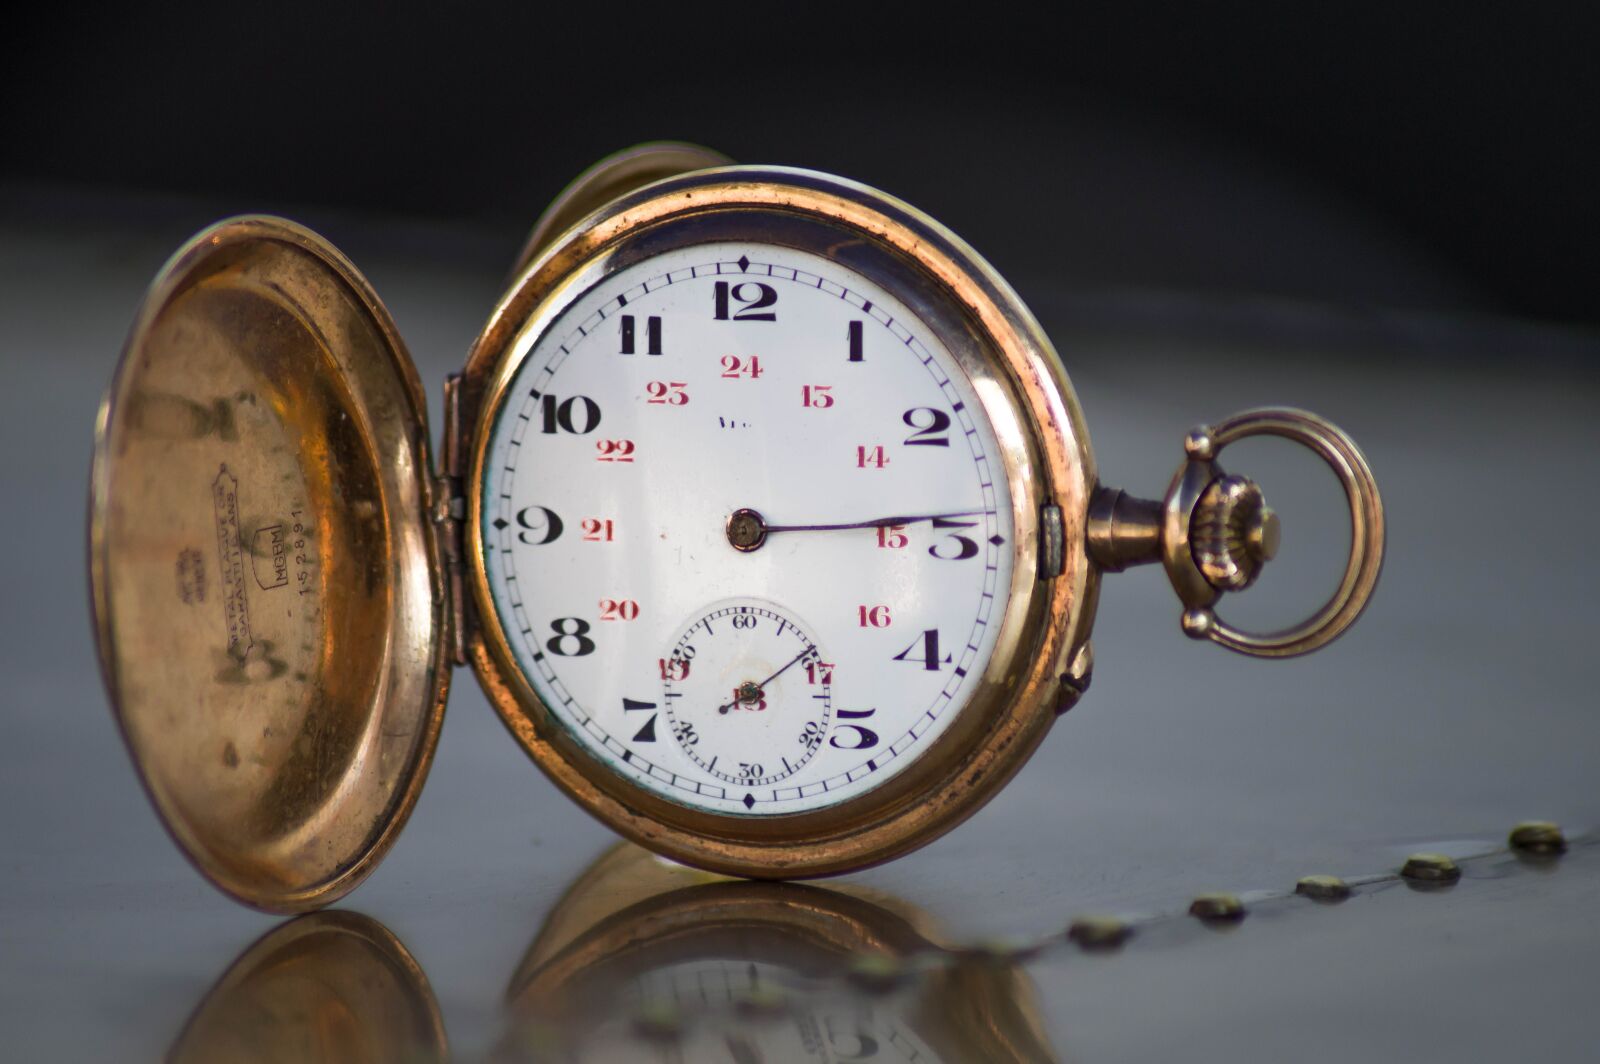 Tamron AF 70-300mm F4-5.6 Di LD Macro sample photo. Watch old, pocket watch photography